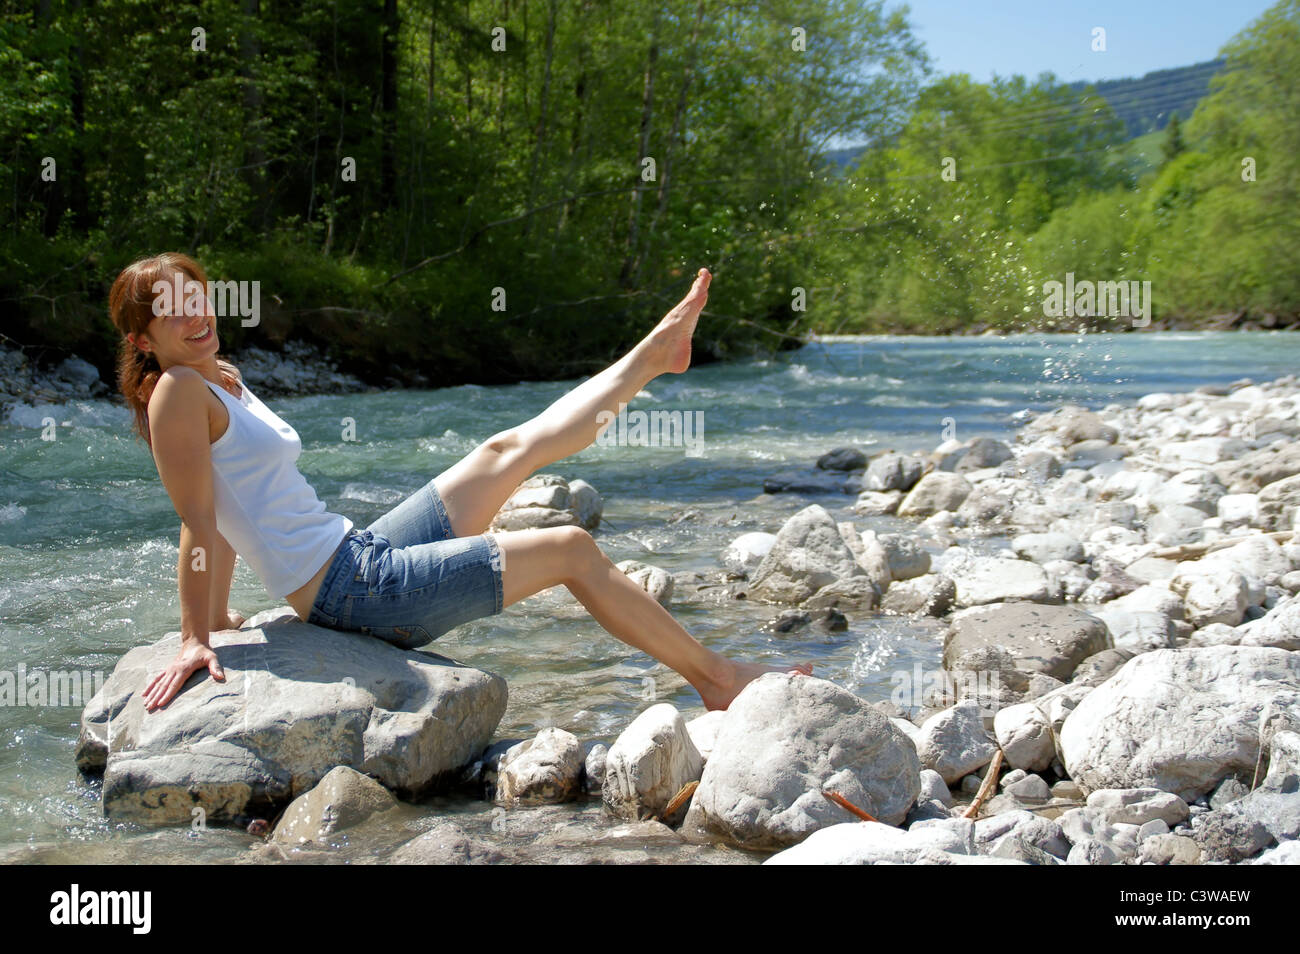 A young, beautiful woman is refreshing in a river. Stock Photo